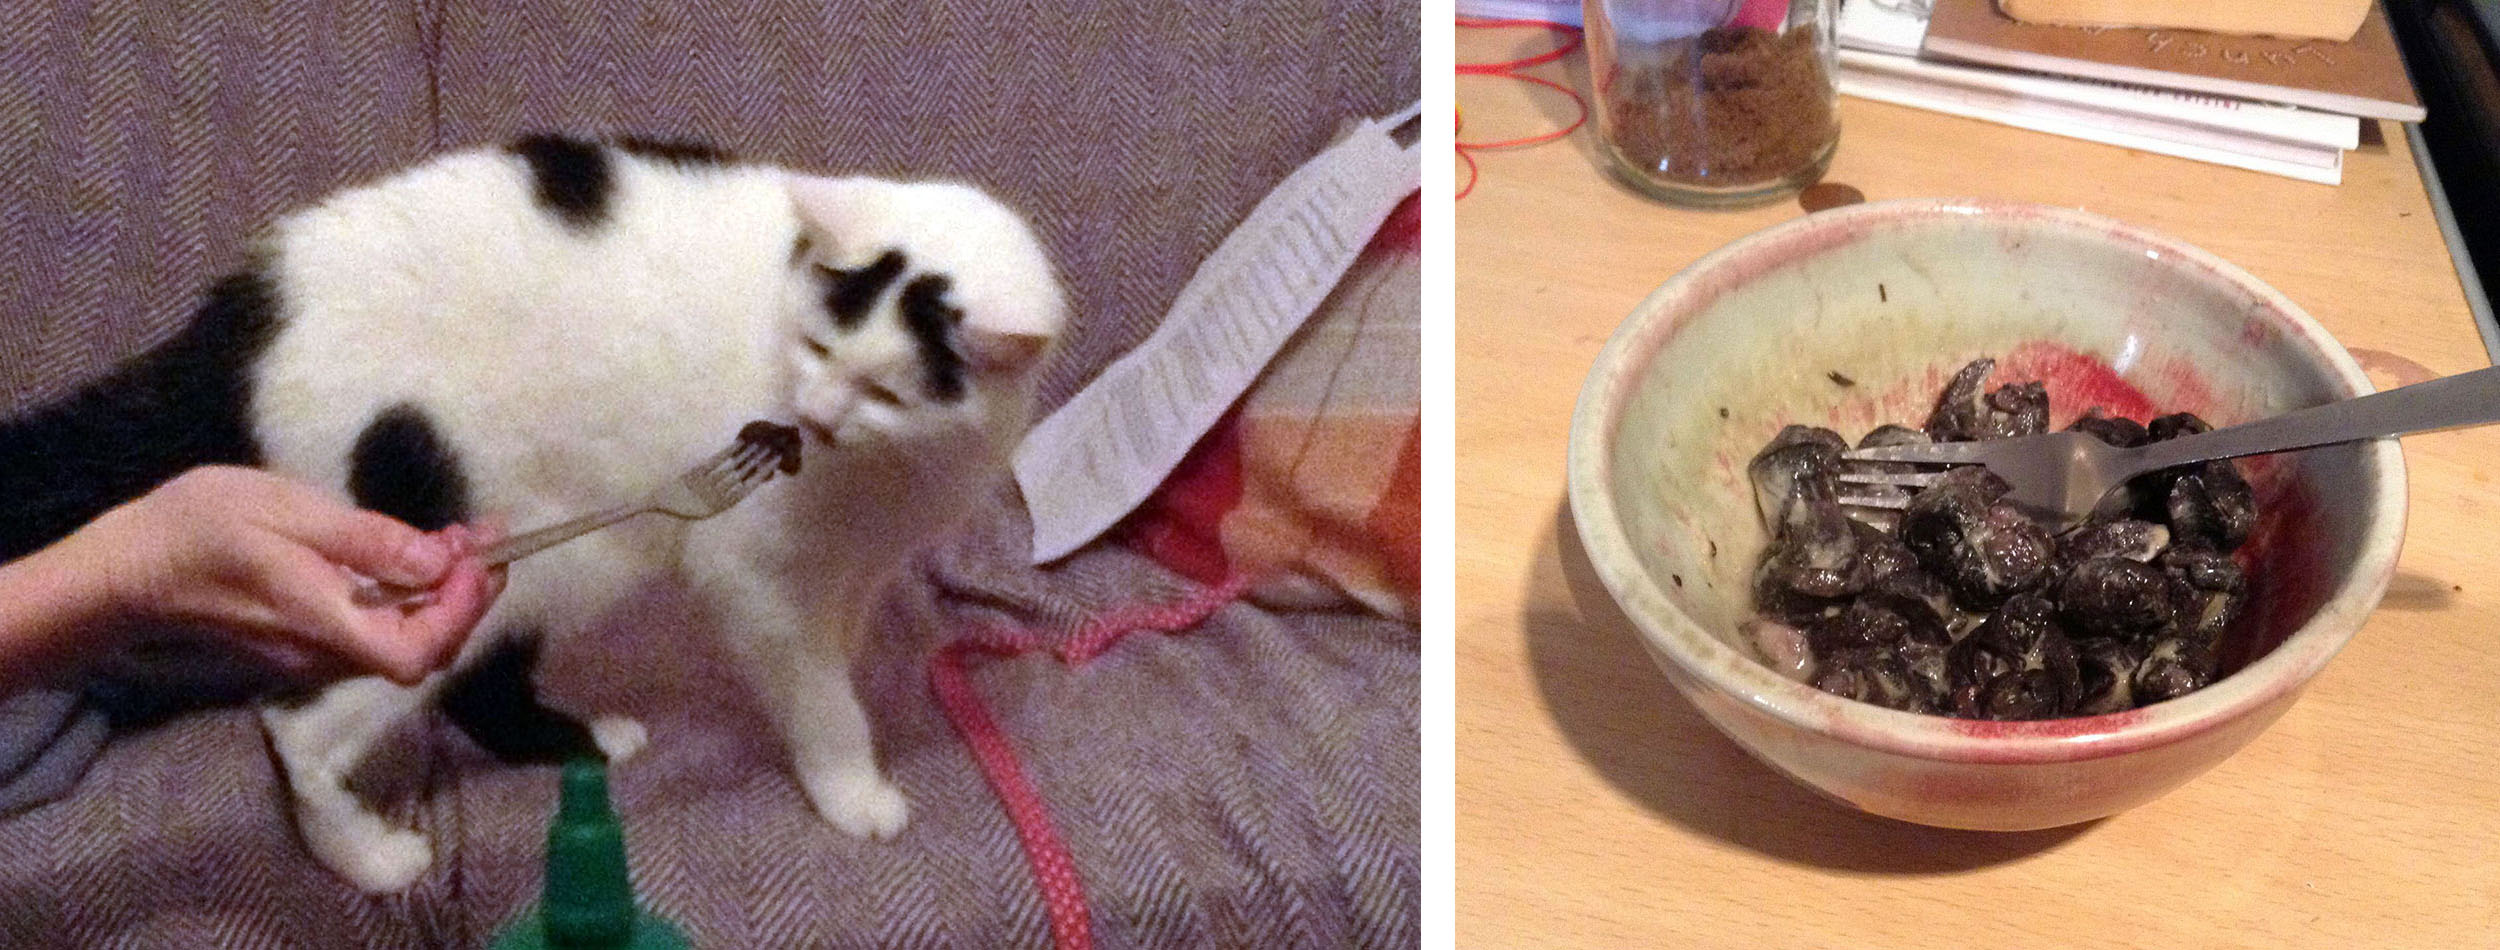 Left: Sniff test. Right: Ready to eat.